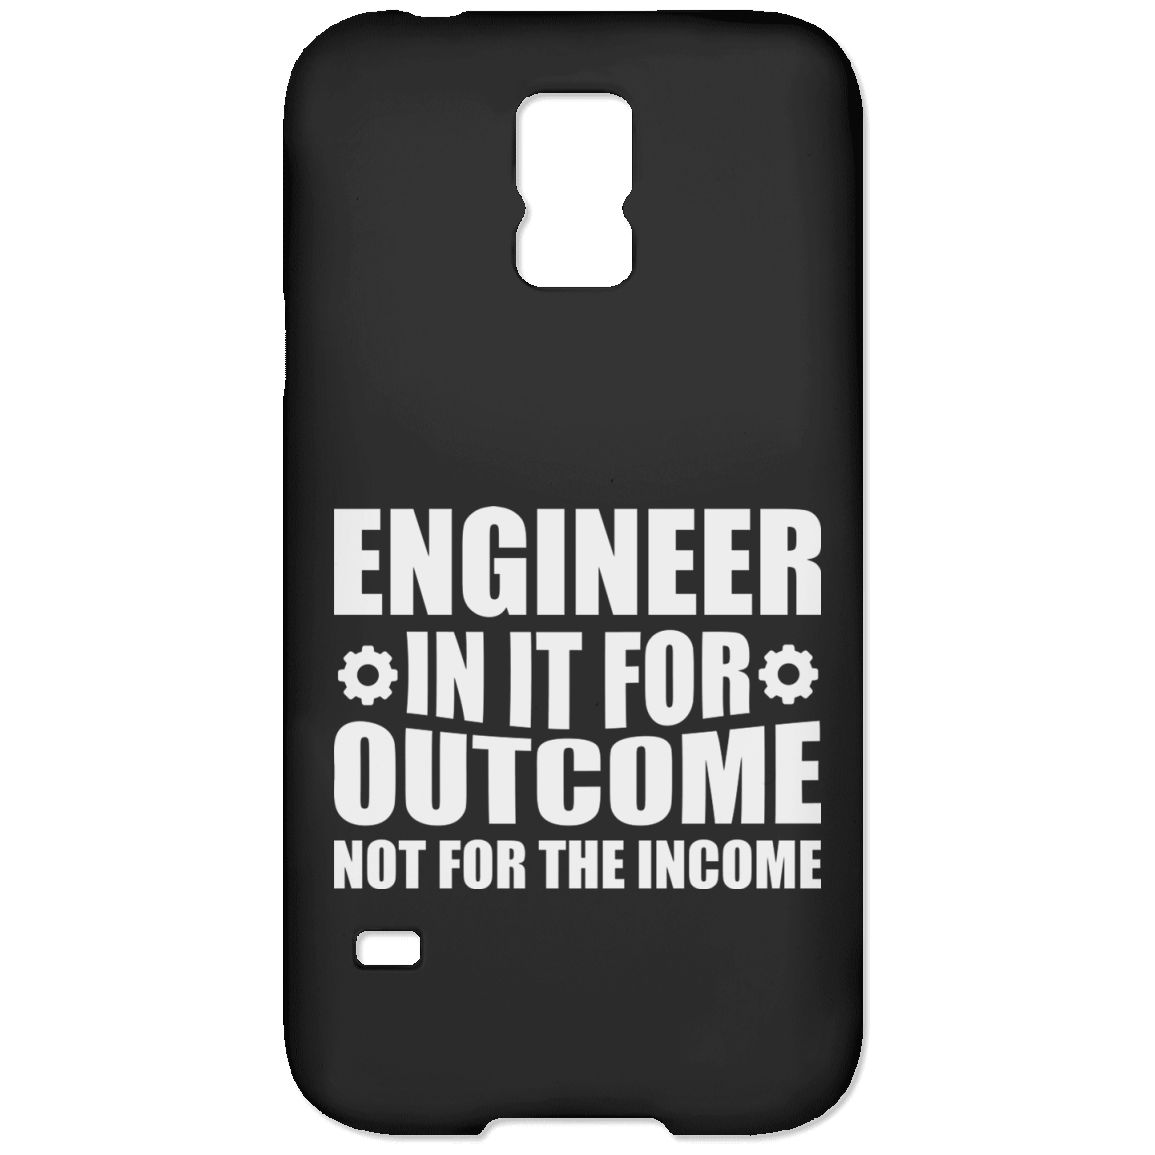 Engineer In It For The Outcome, Not The Income (Phone Case)